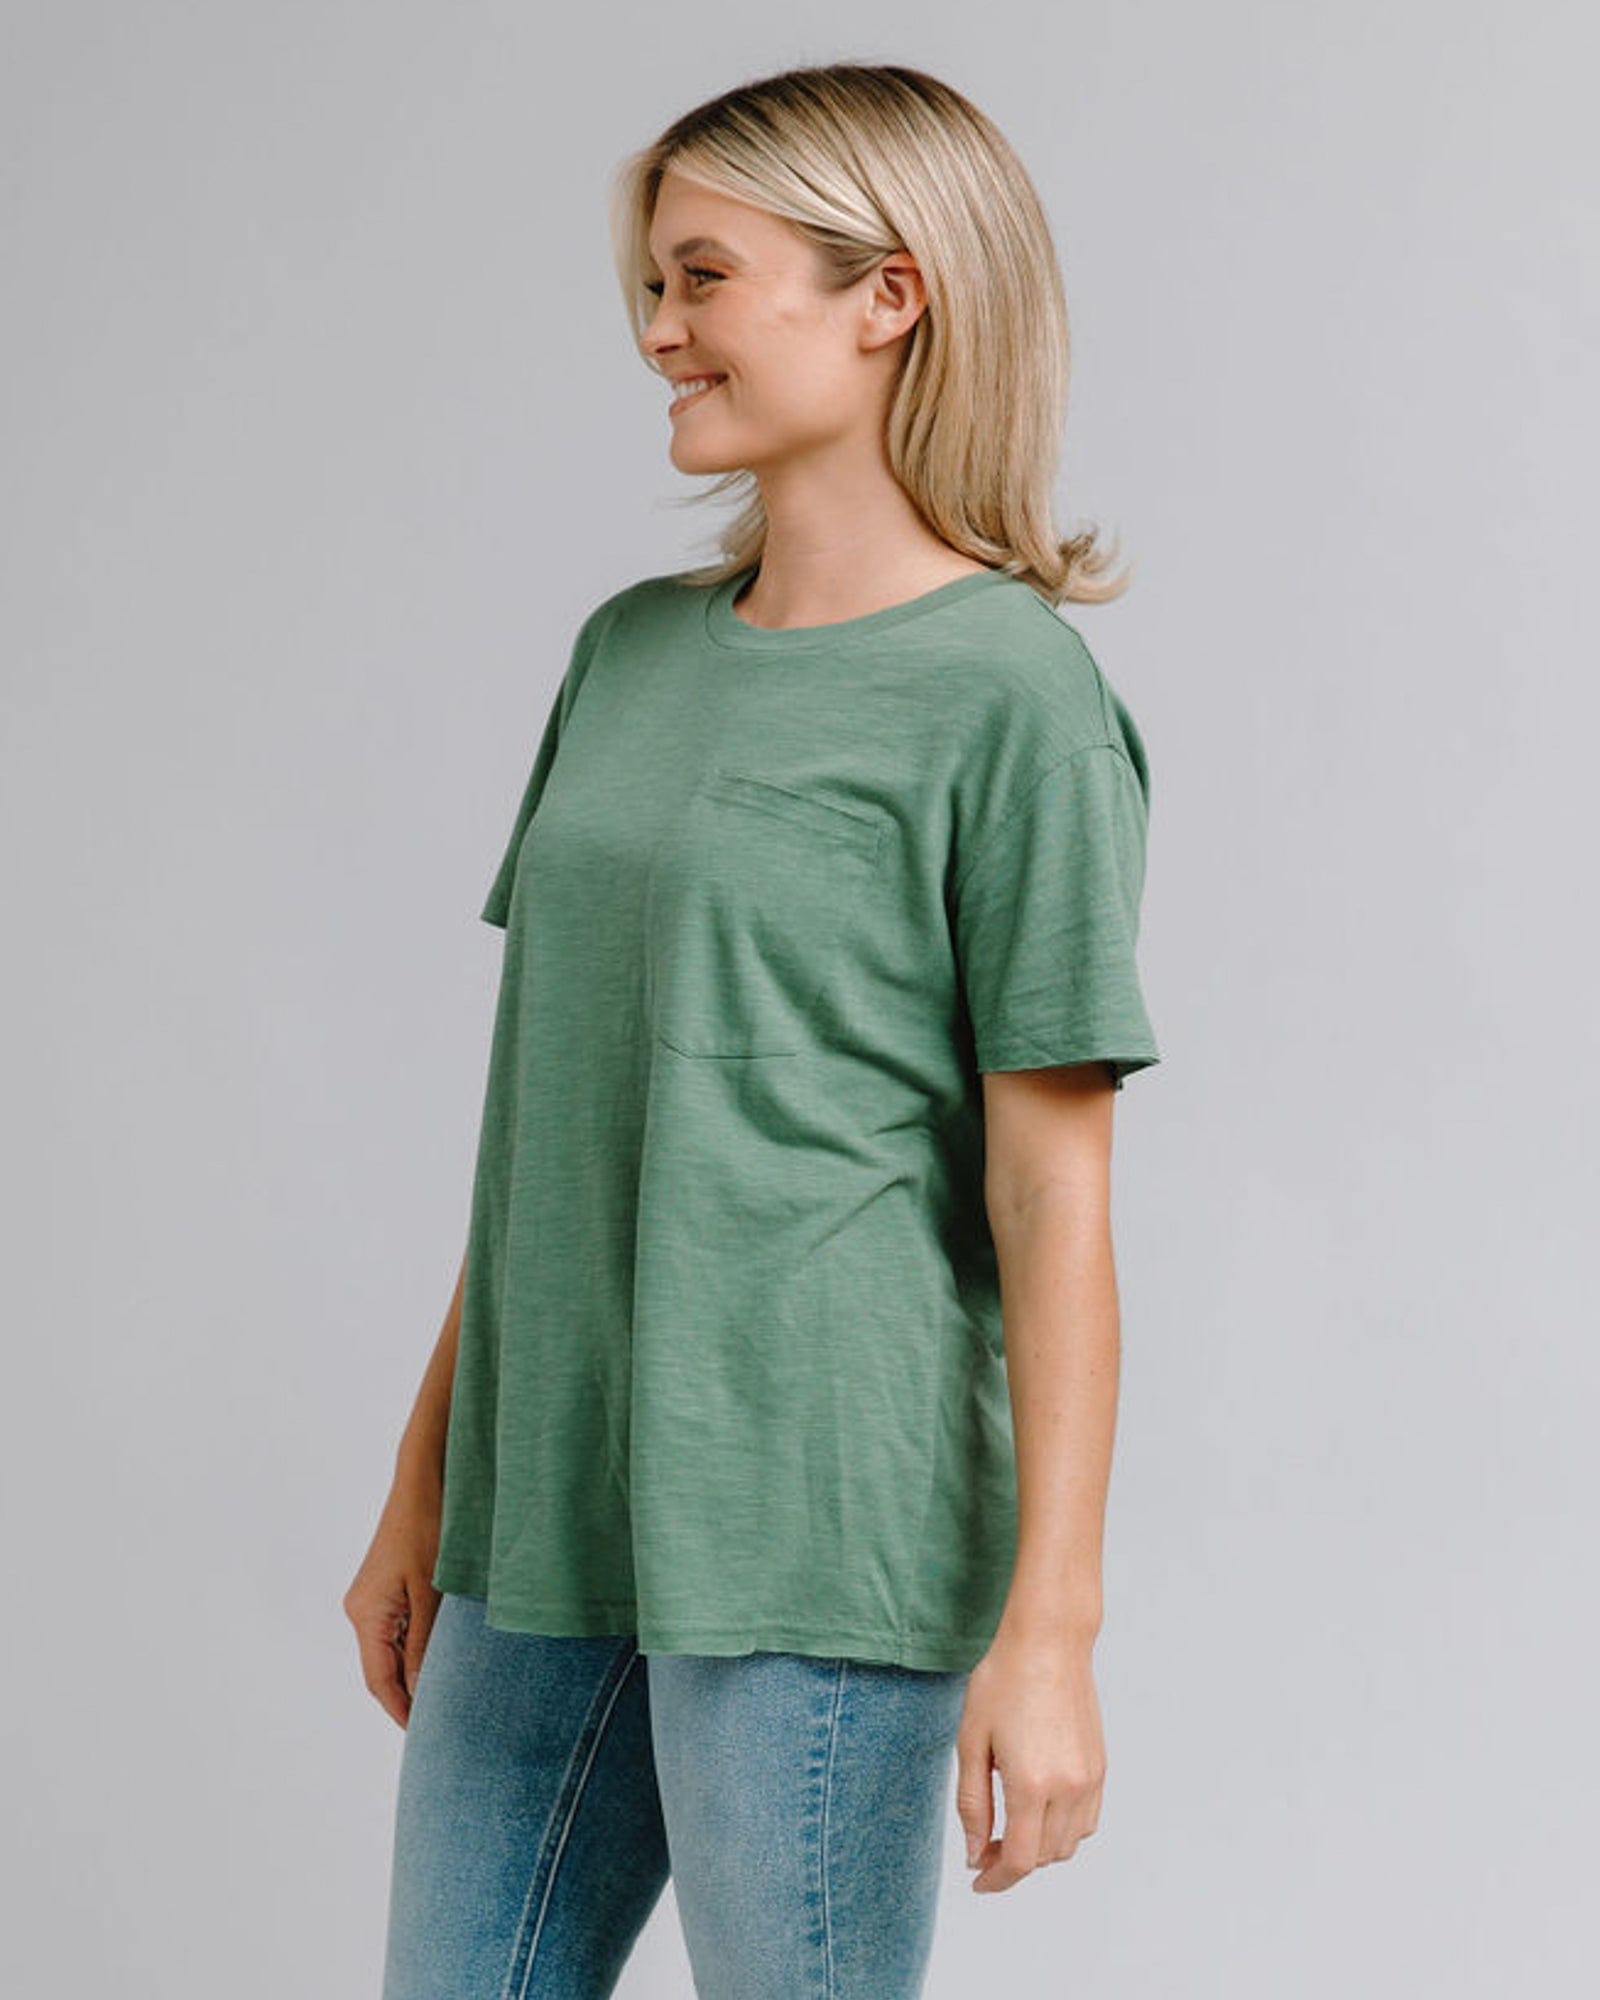 Woman in a short sleeve, oversized, t-shirt